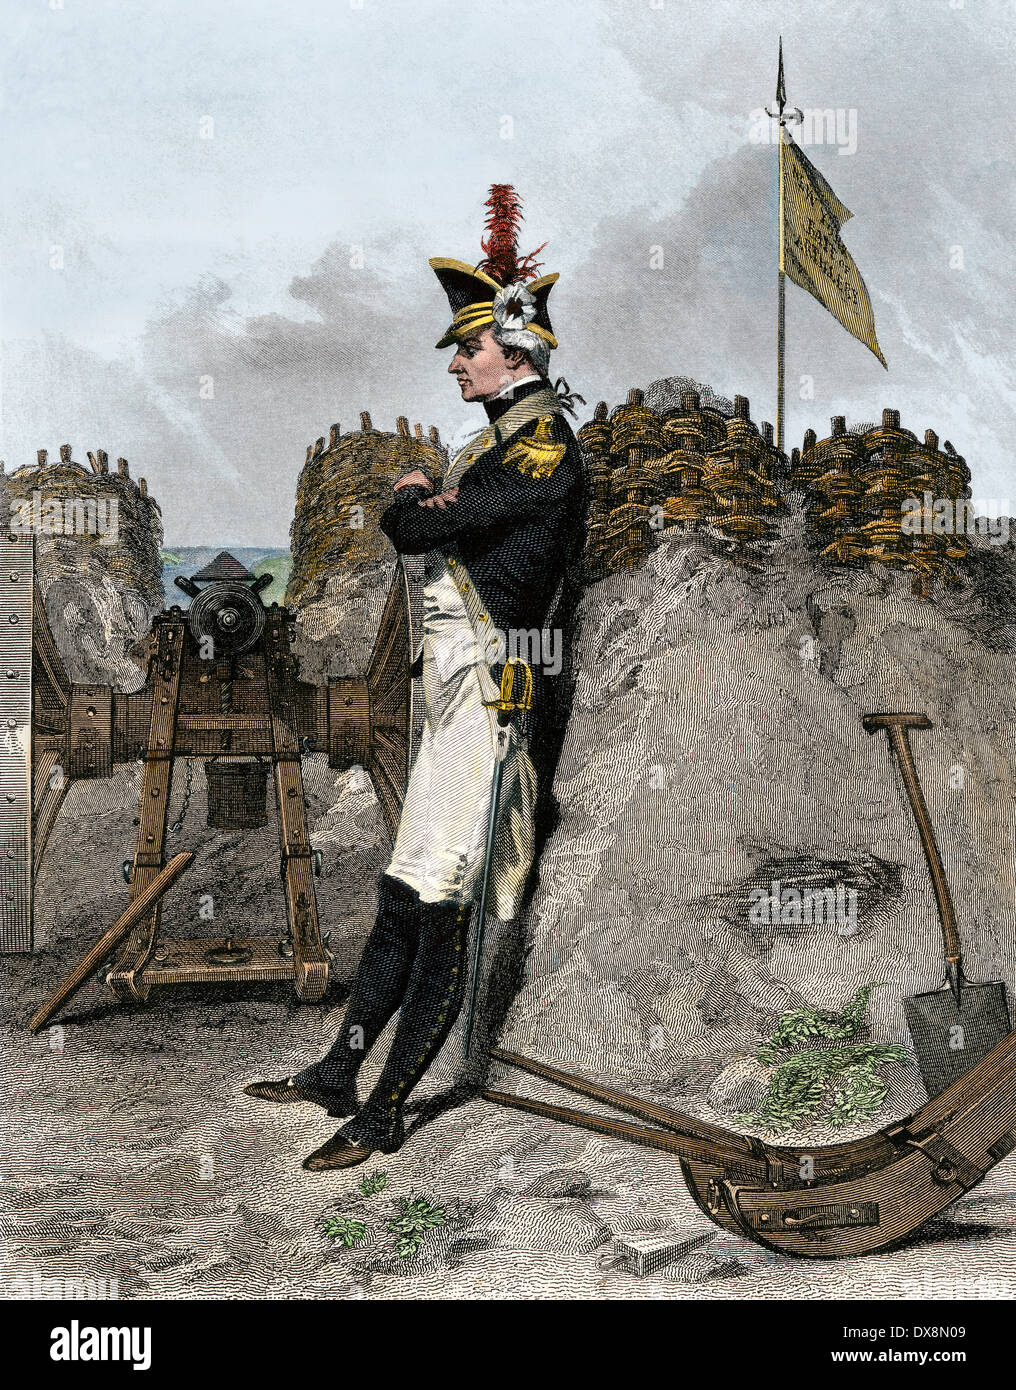 Alexander Hamilton when an artillery officer in the American Revolution. Hand-colored steel engraving Stock Photo